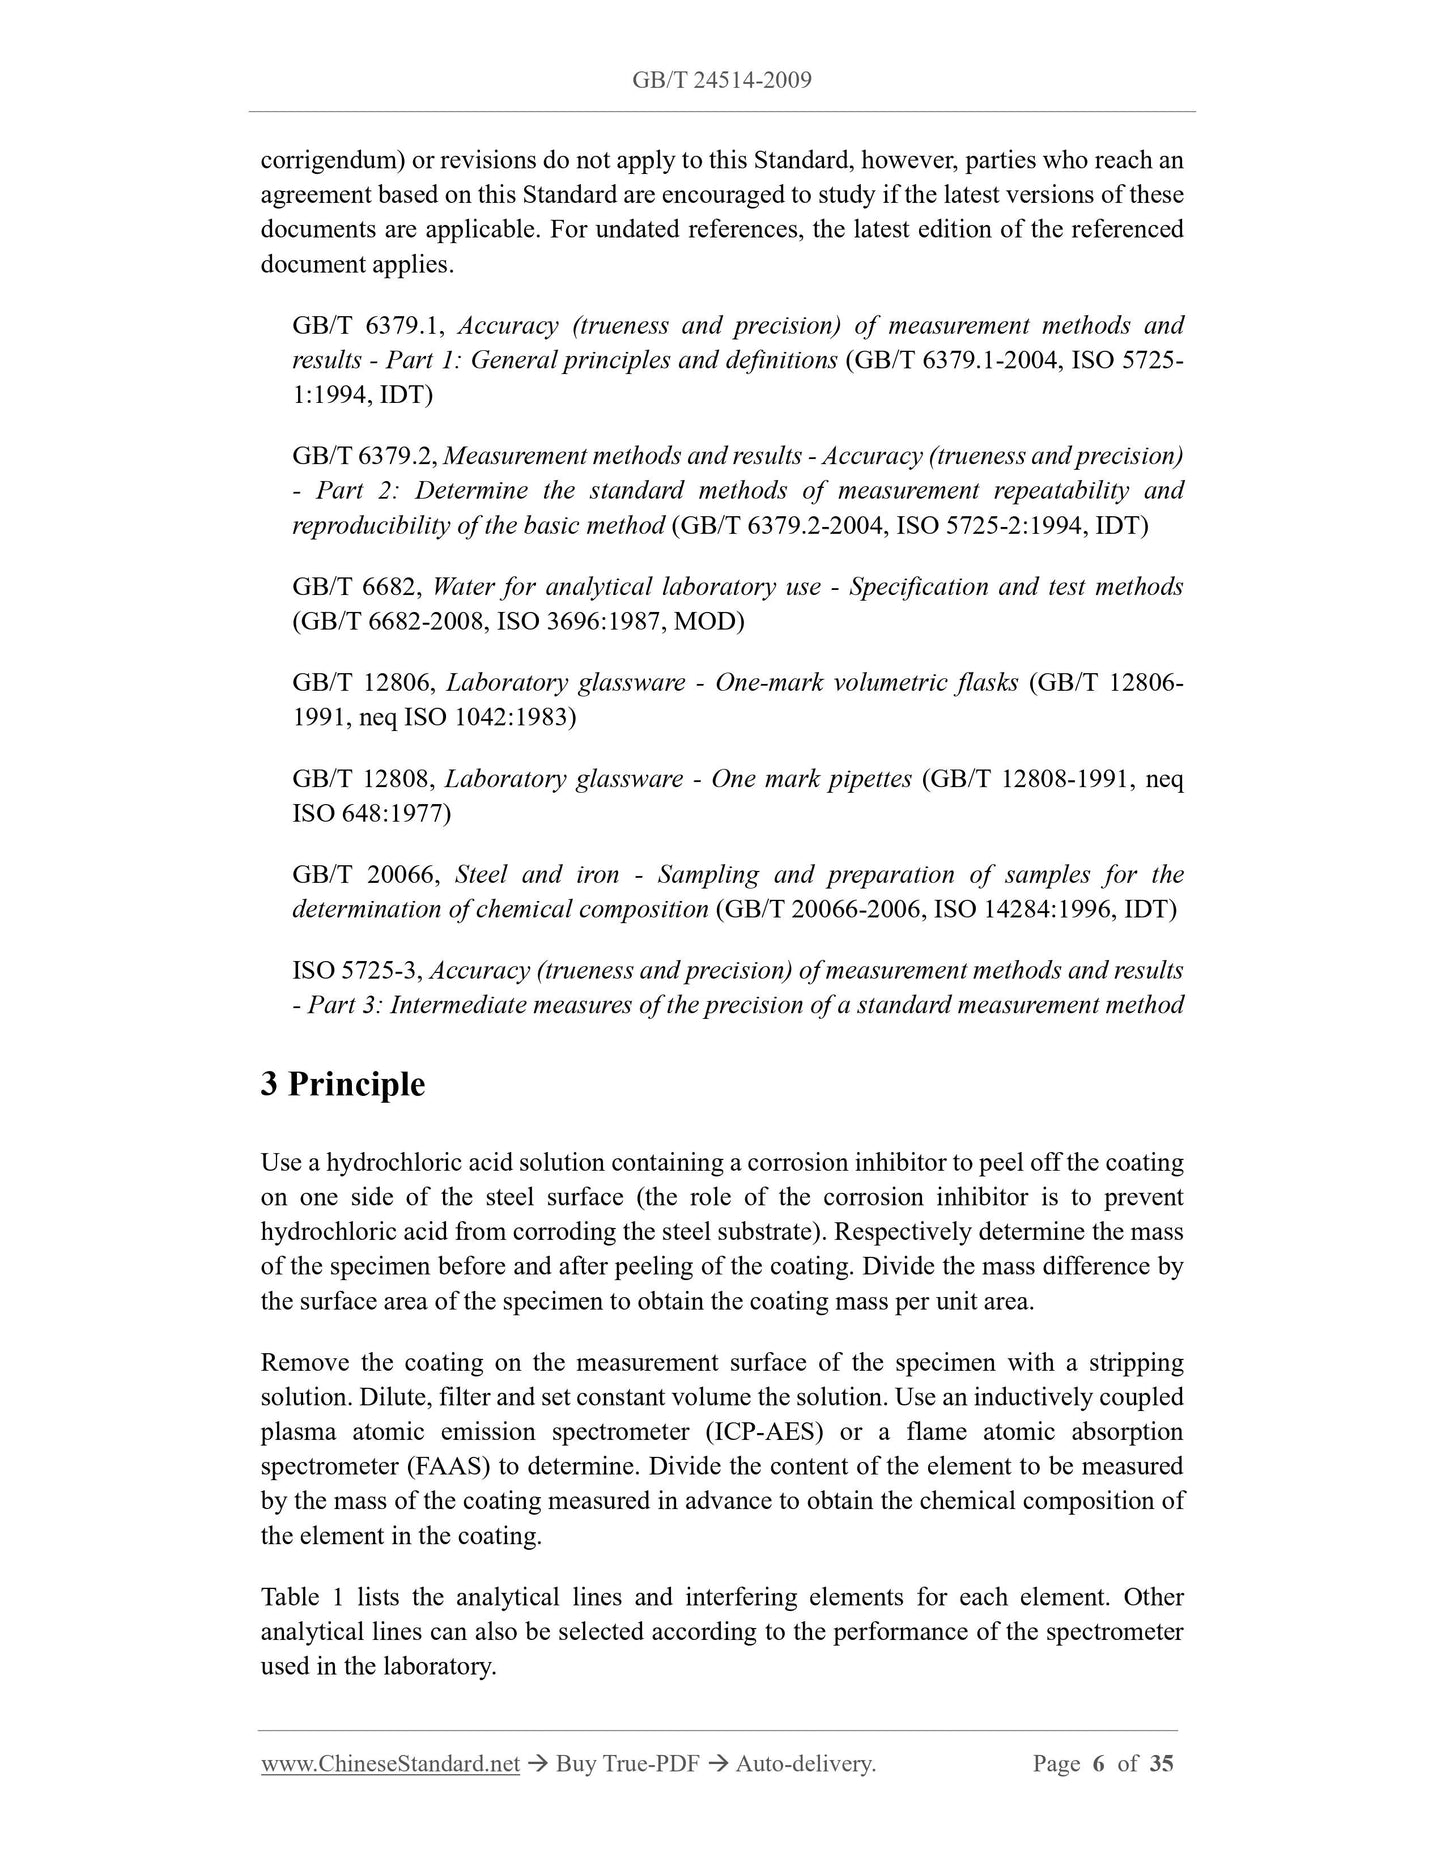 GB/T 24514-2009 Page 4